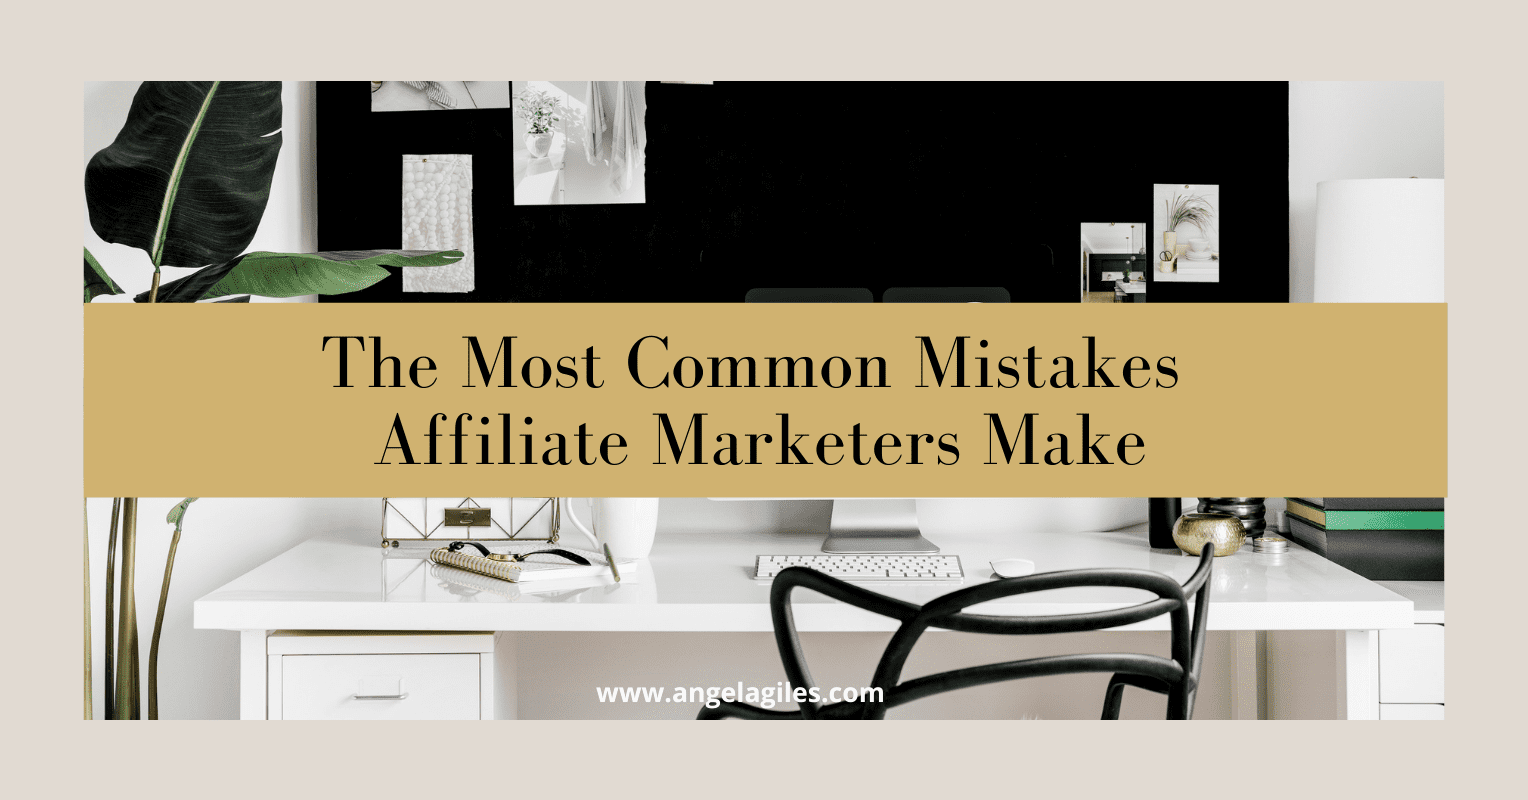 The Most Common Mistakes Affiliate Marketers Make